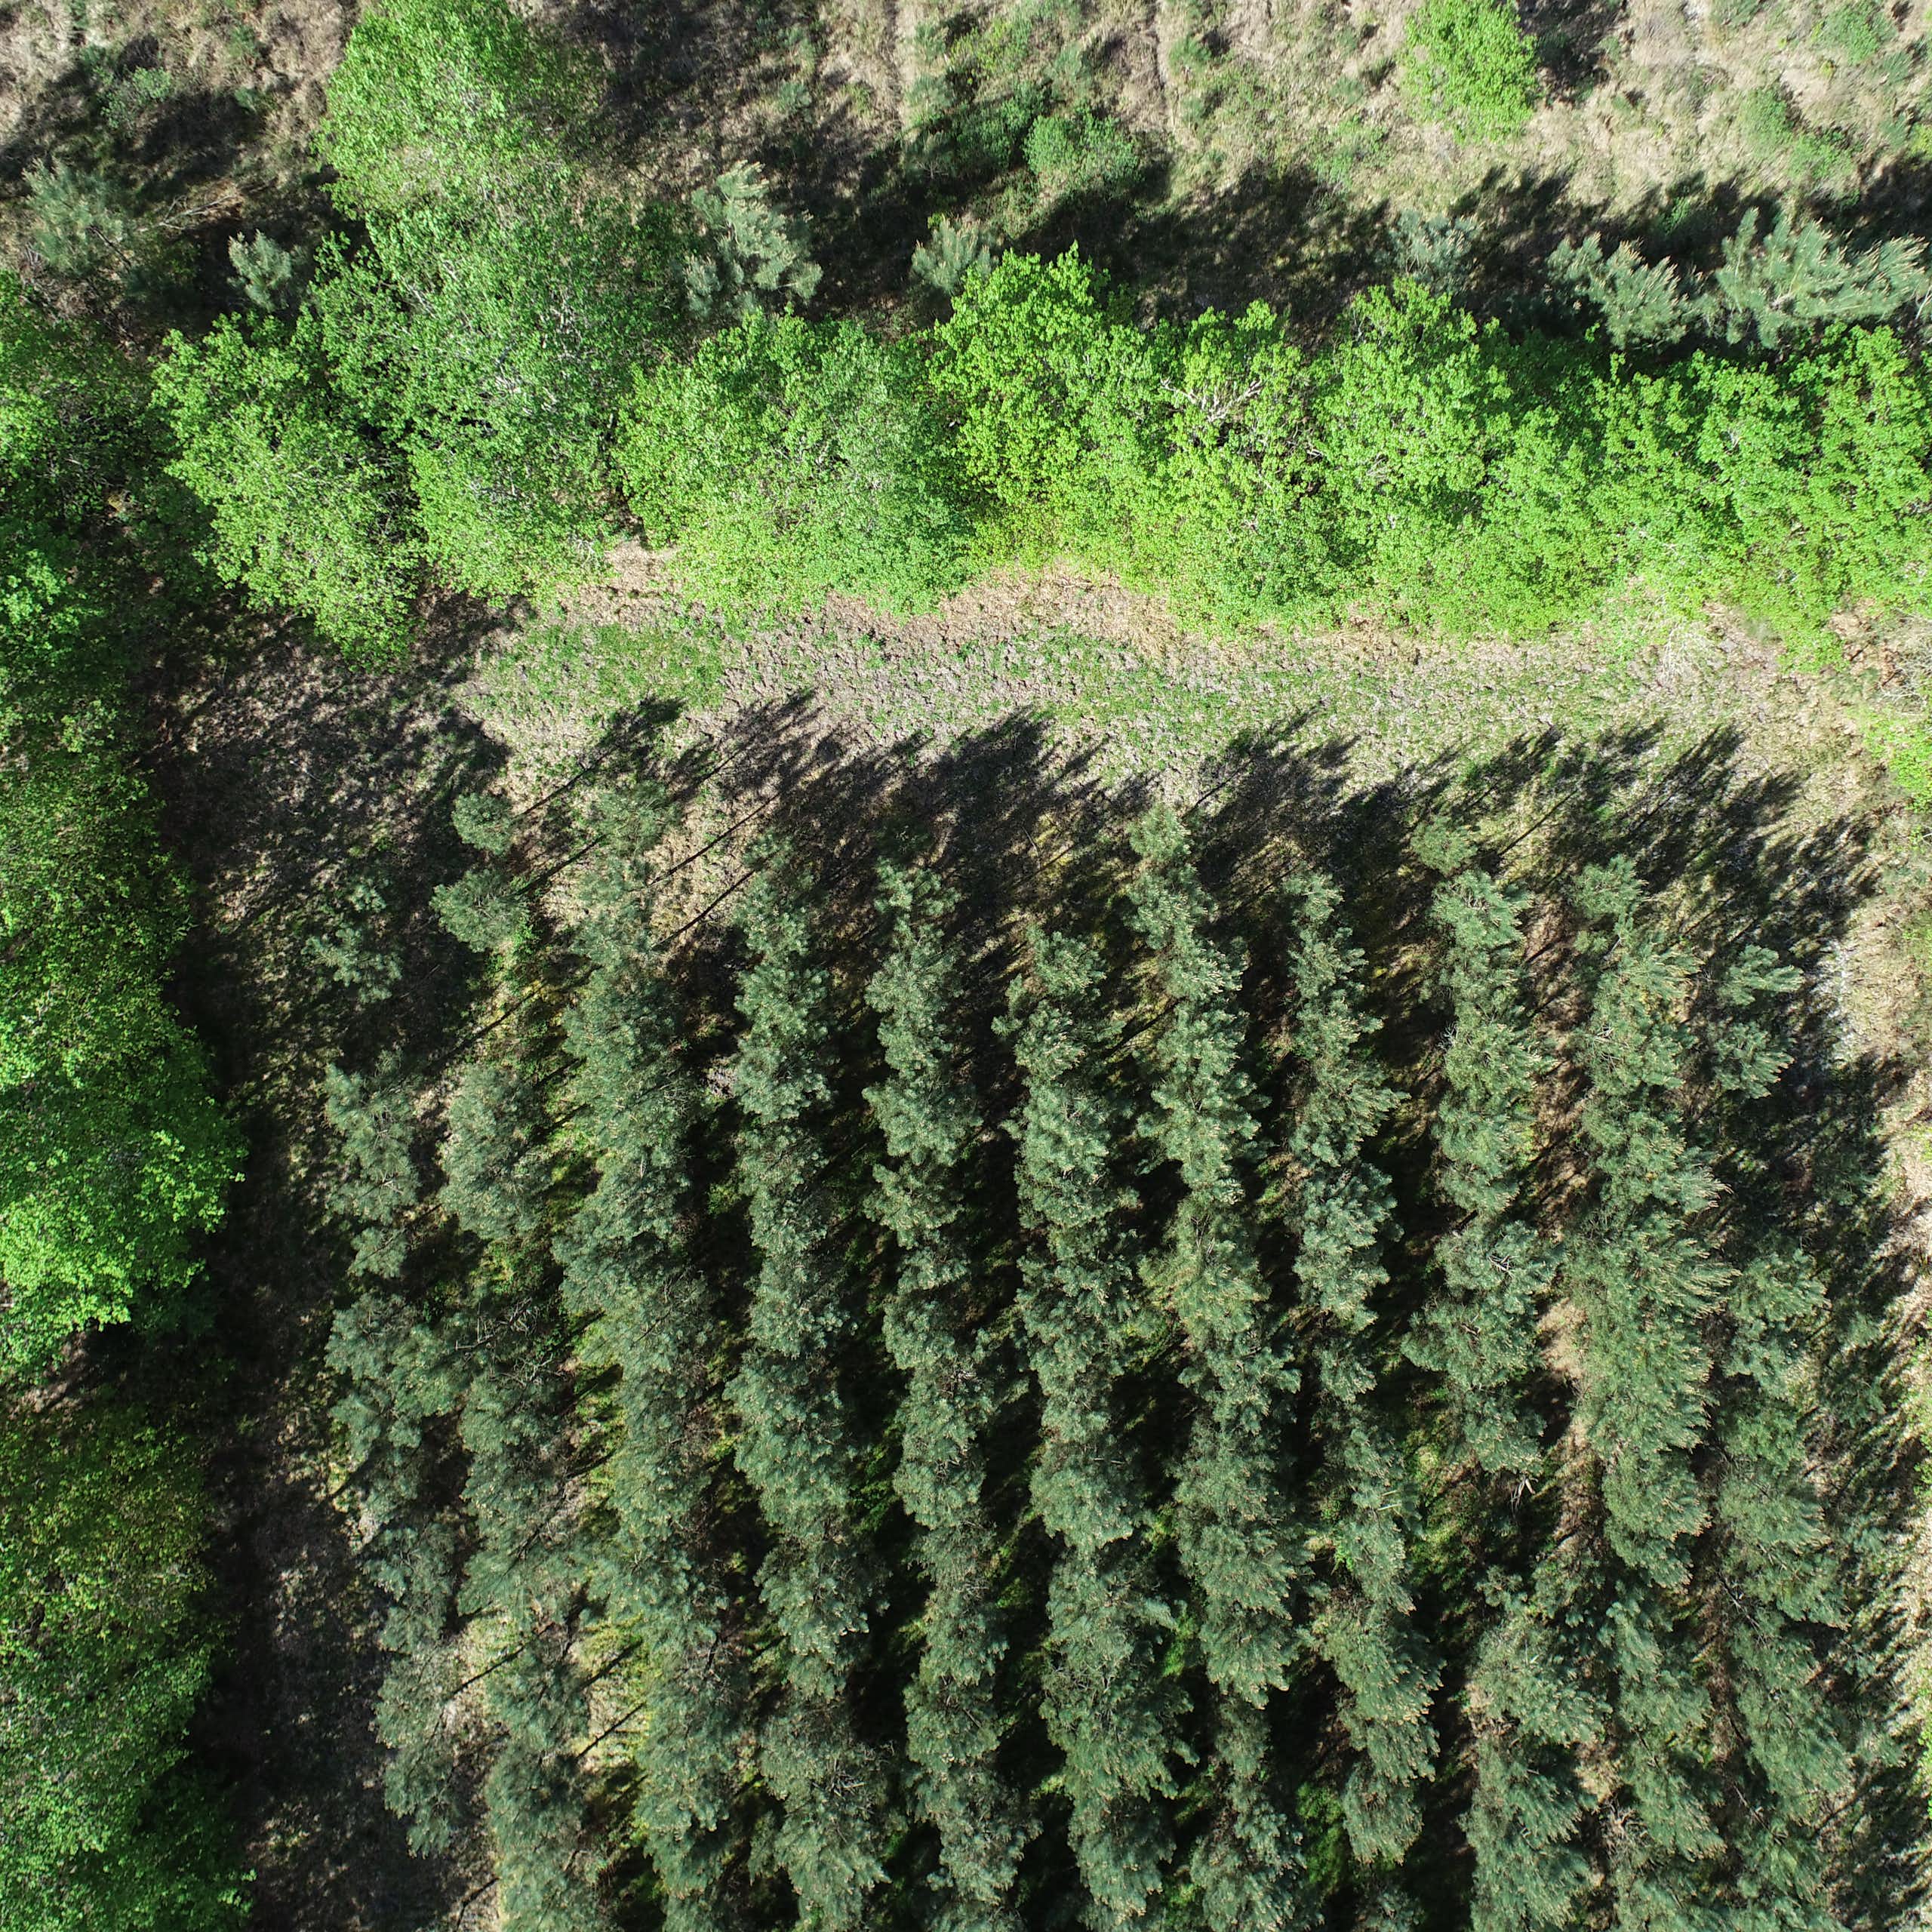 A pine plantation and hedgerow as seen from an unmanned aerial vehicle.